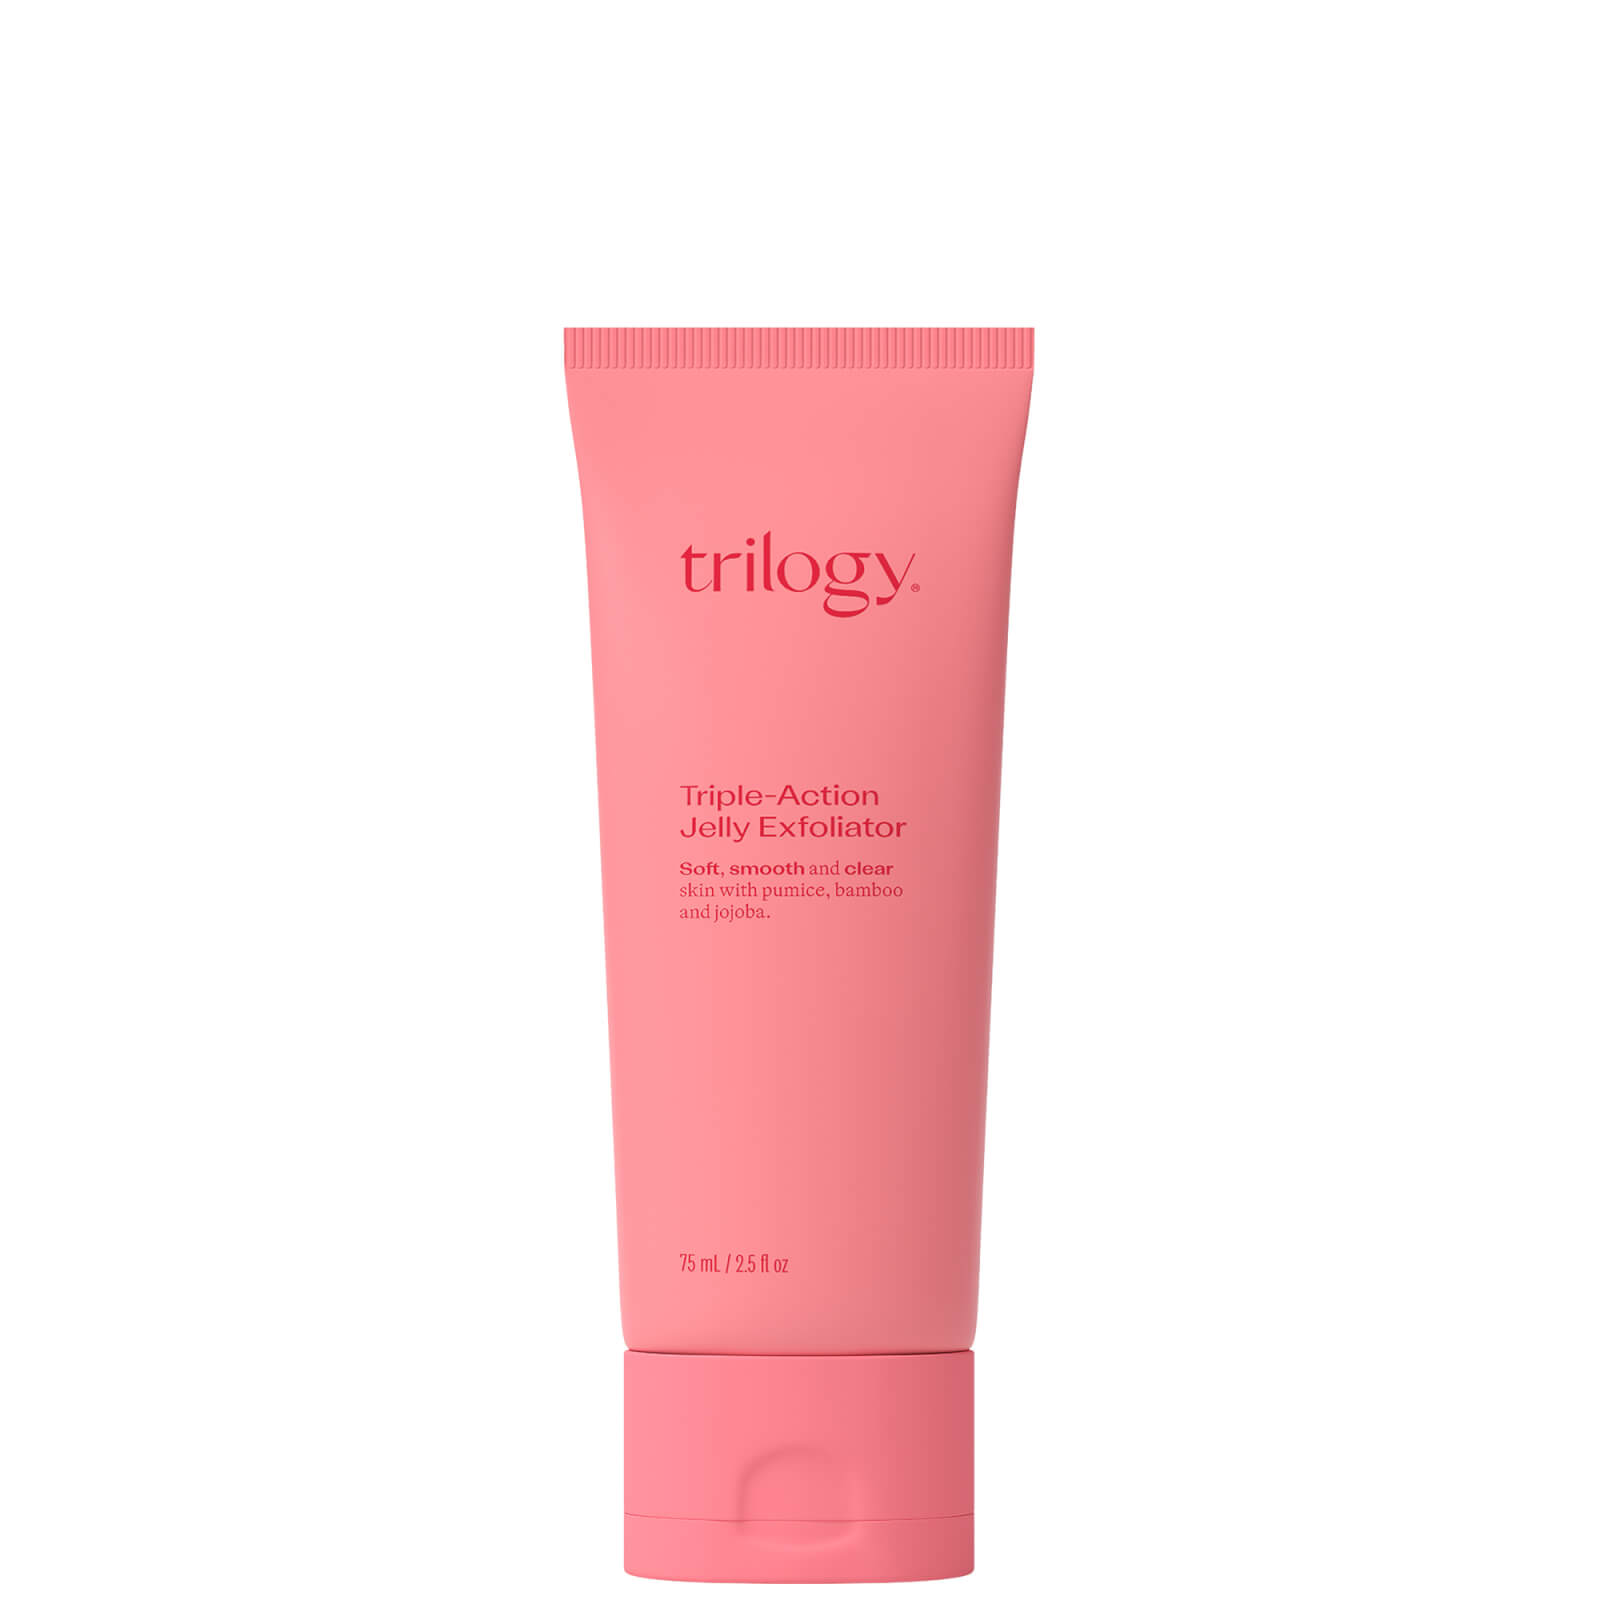 Image of Trilogy Triple-Action Jelly Exfoliator 75ml